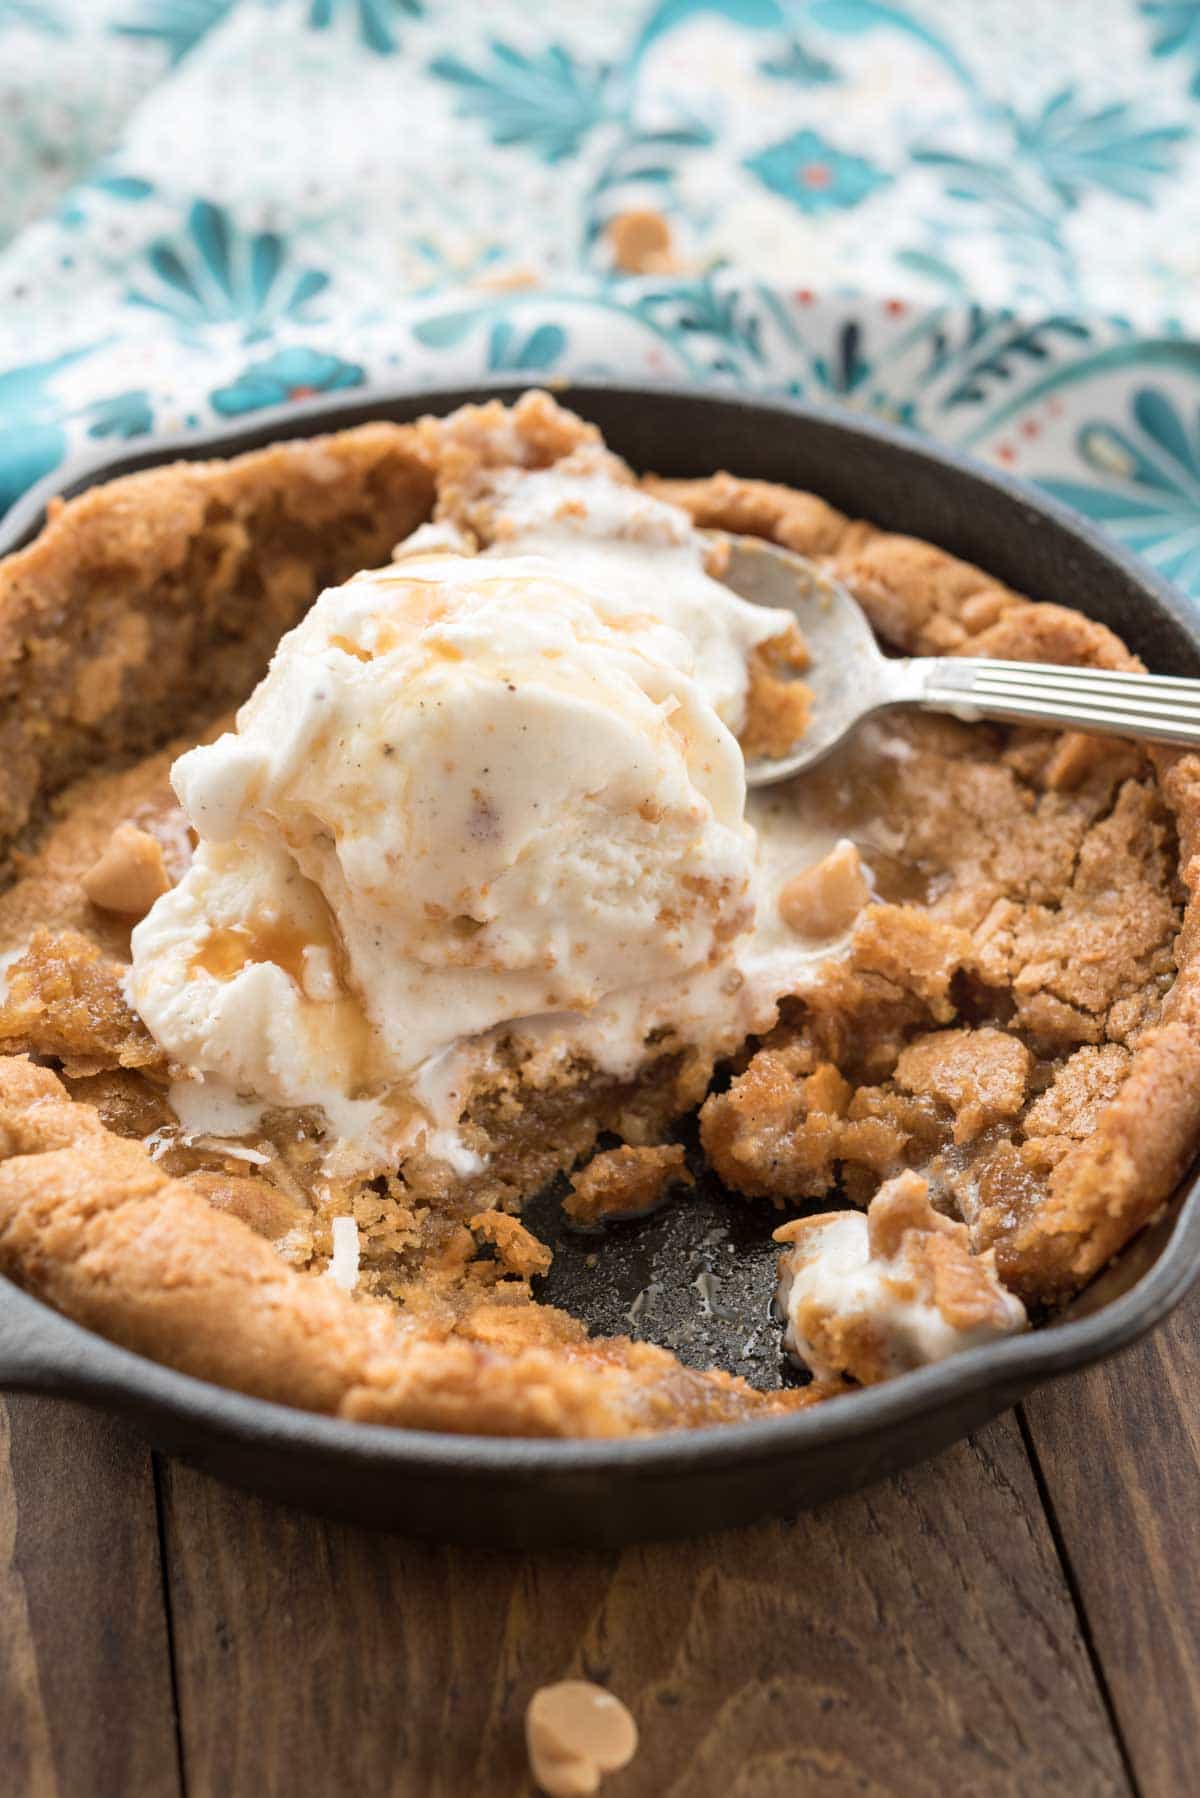 Small Batch Skillet Blondie - this easy blondie recipe is made for two! It mixes up in just a few minutes and is baked in a small pan or cast iron skillet. Top with ice cream for a single serve dessert!